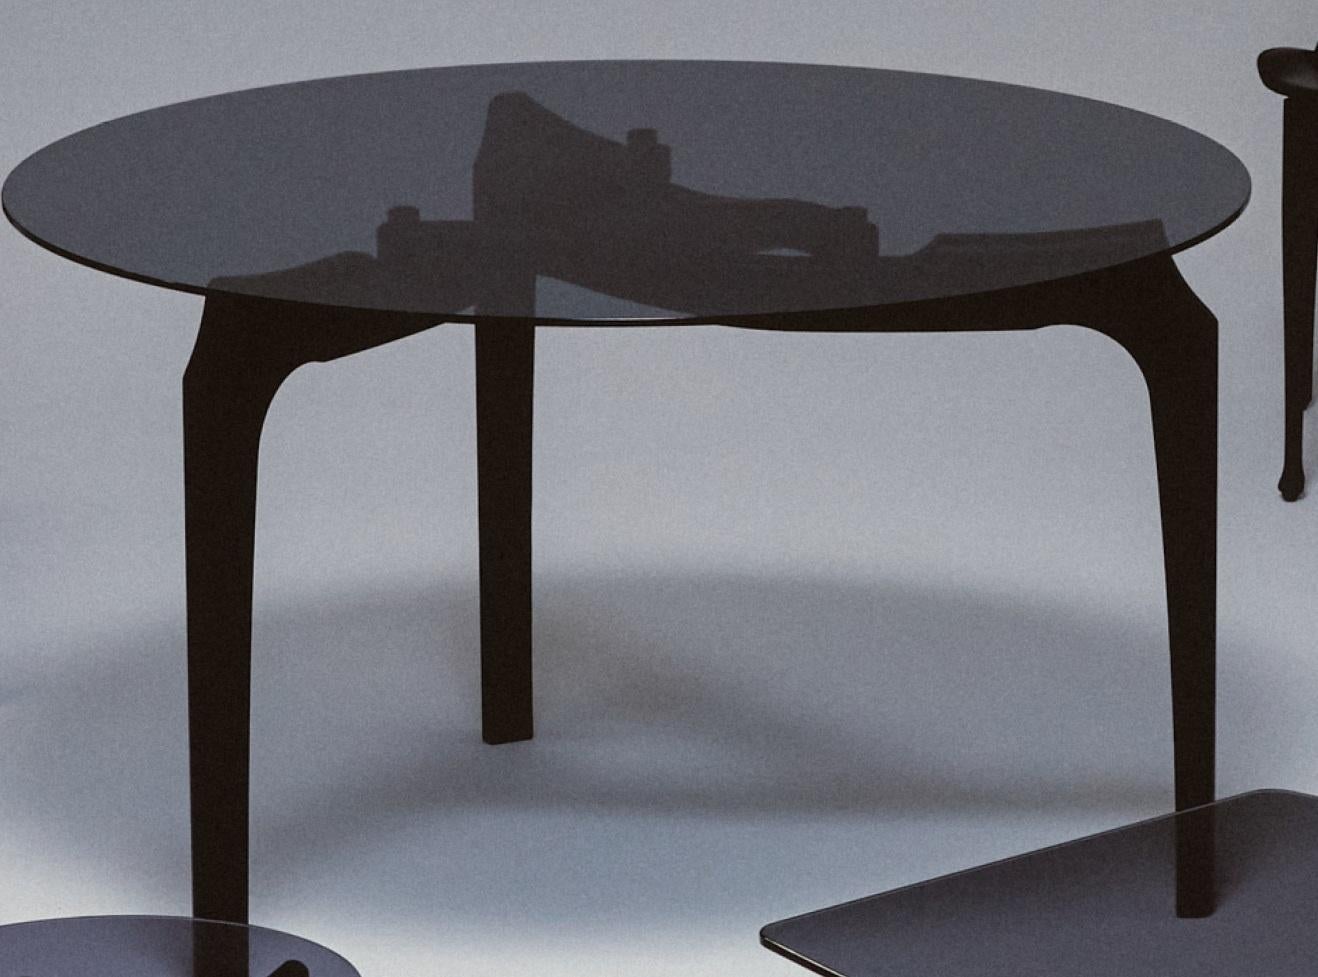 Carlina Round Dining Table by Oscar Tusquets
Dimensions: Ø 120 x H 74 cm.
Materials: Solid ash timber and tempered smoked glass.

Solid ash timber structure, stained black. 1 cm thick tempered smoked glass top.

Gaulino Family
Distinctive